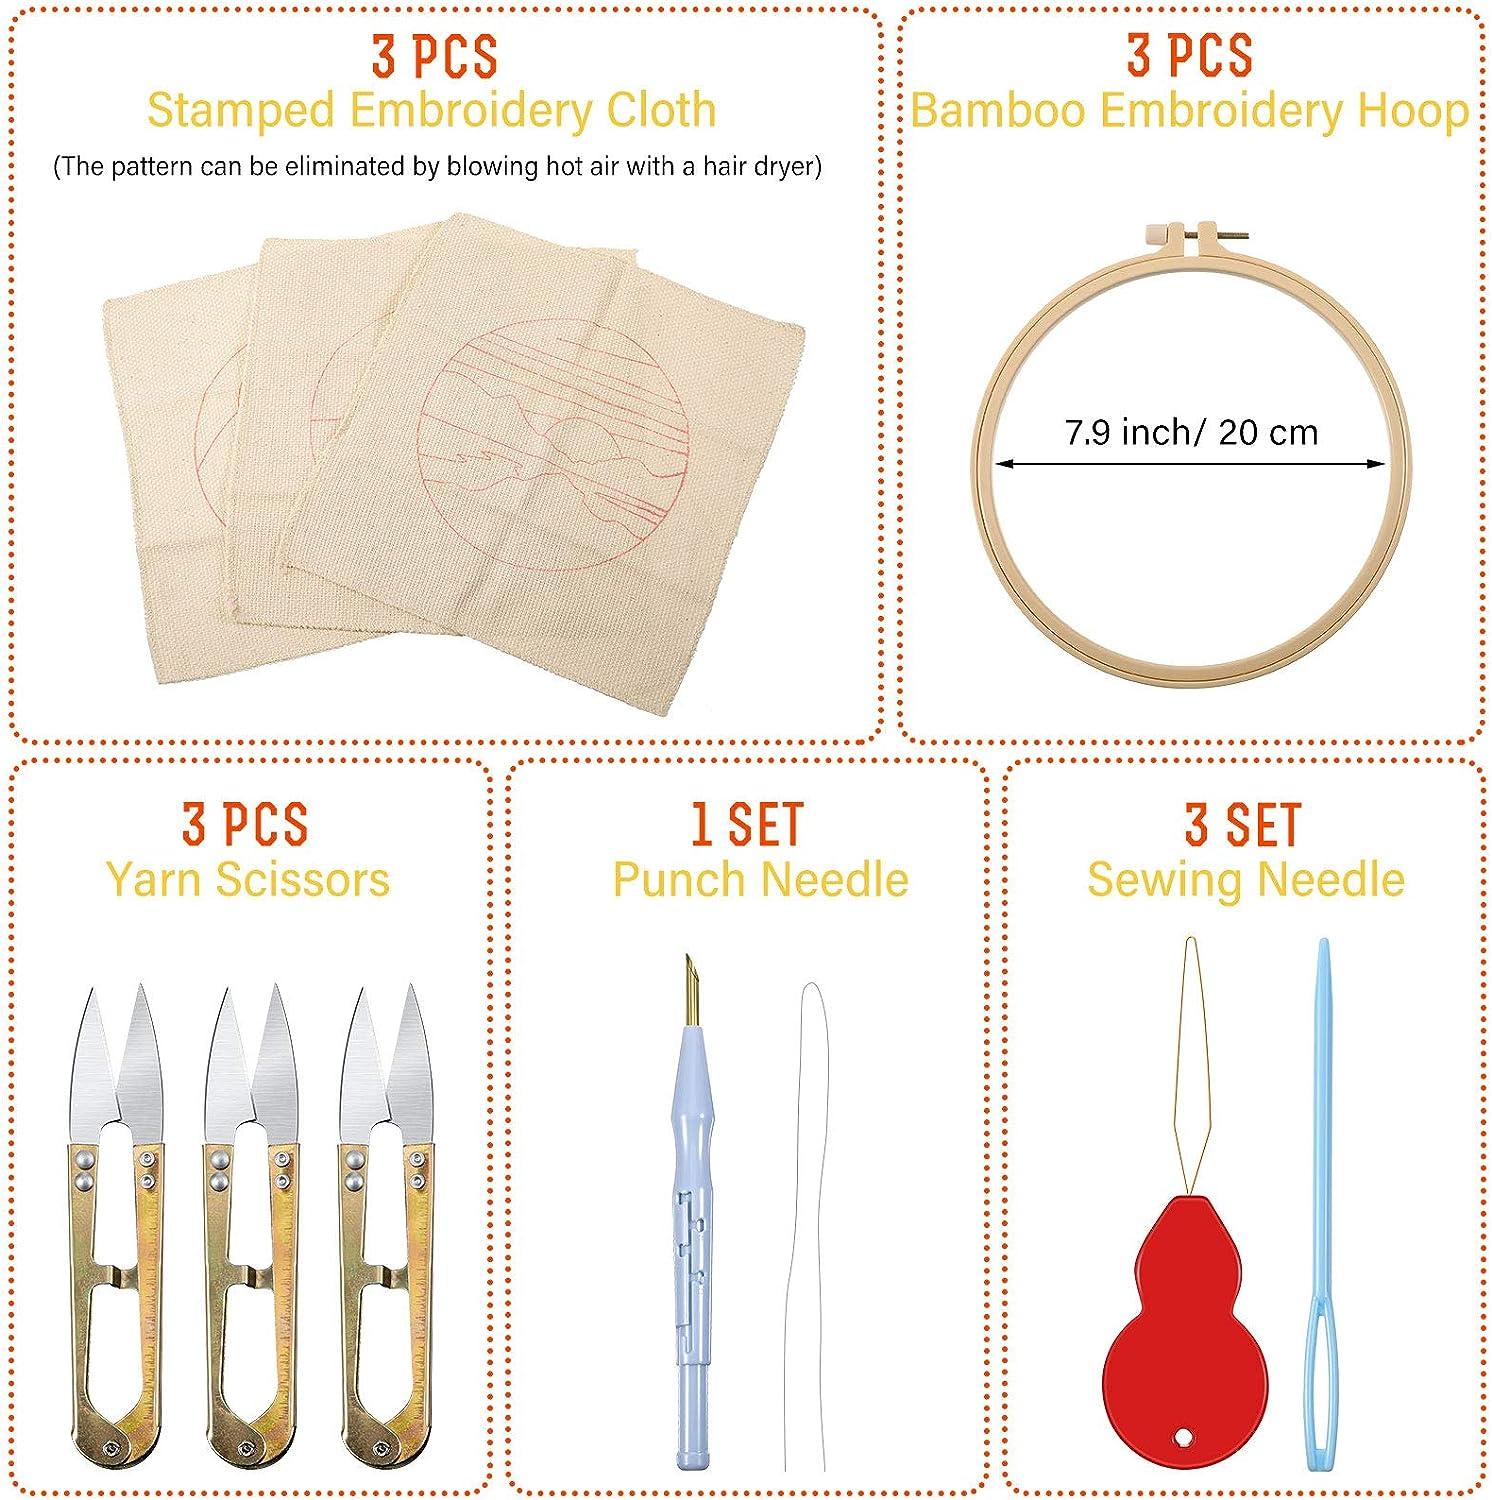 4PCS Cloth for Embroidery Punch Needle Starter Kit, 3 Pre-Printed